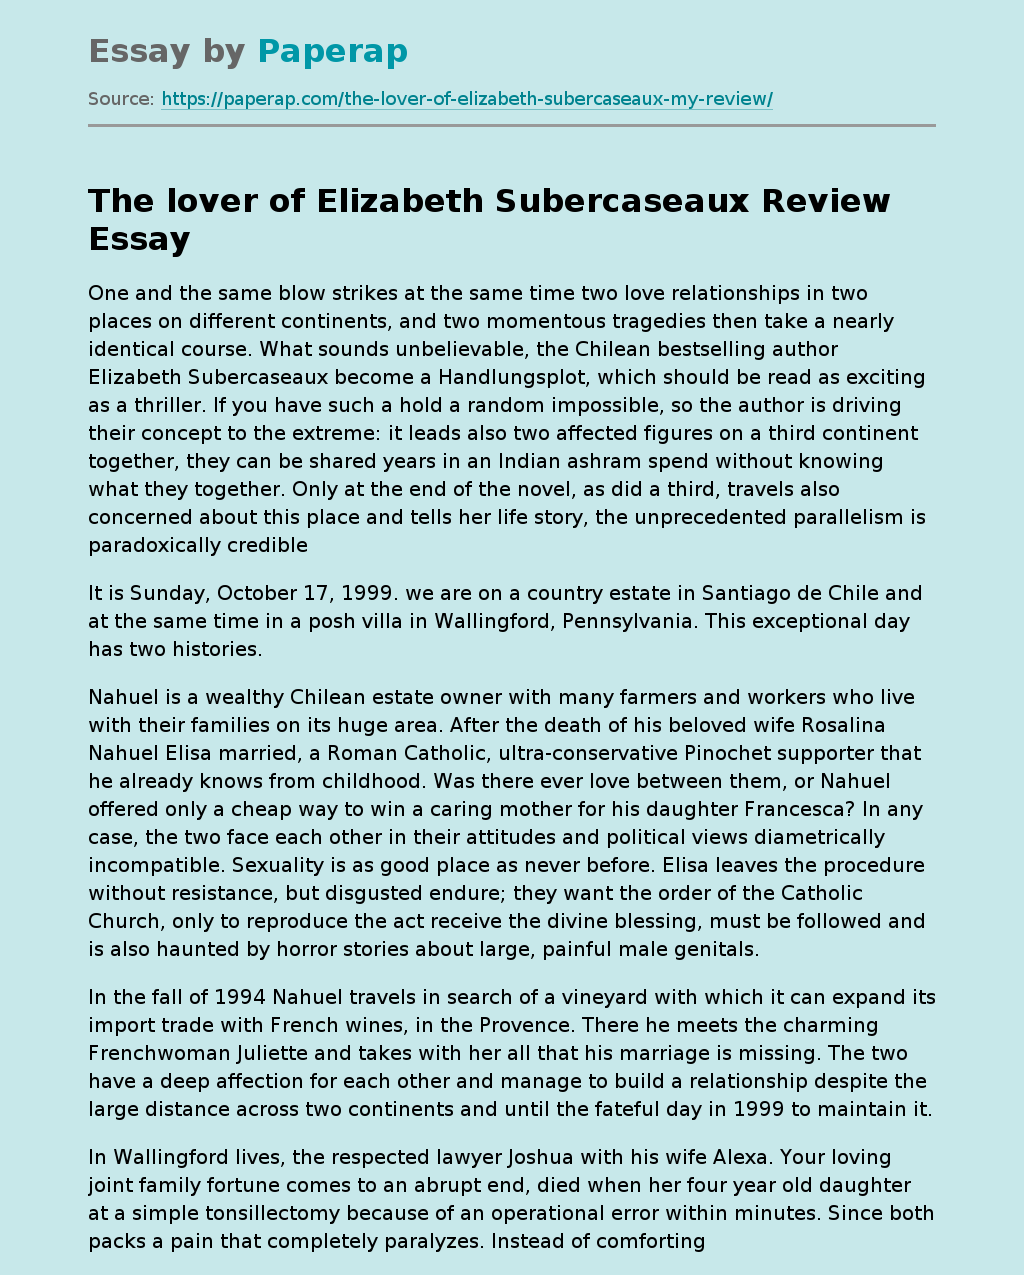 The Lover of Elizabeth Subercaseaux Review